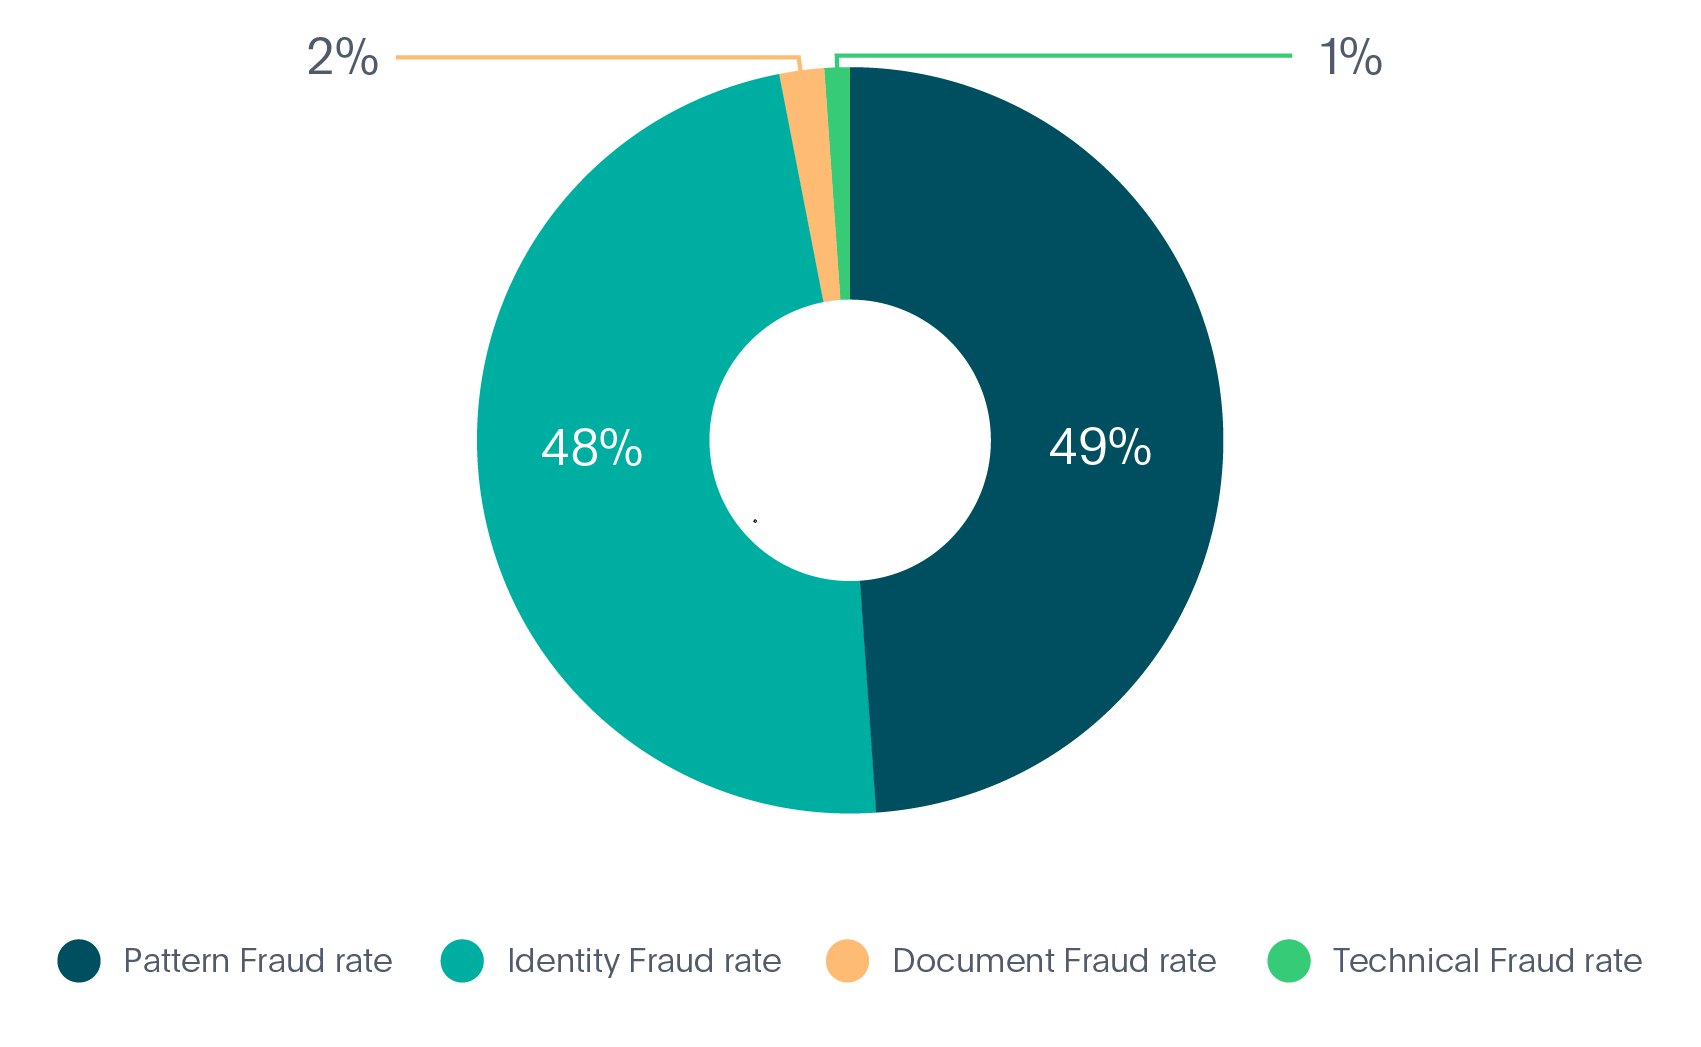 Identity fraud types in Mobility industry in 2020